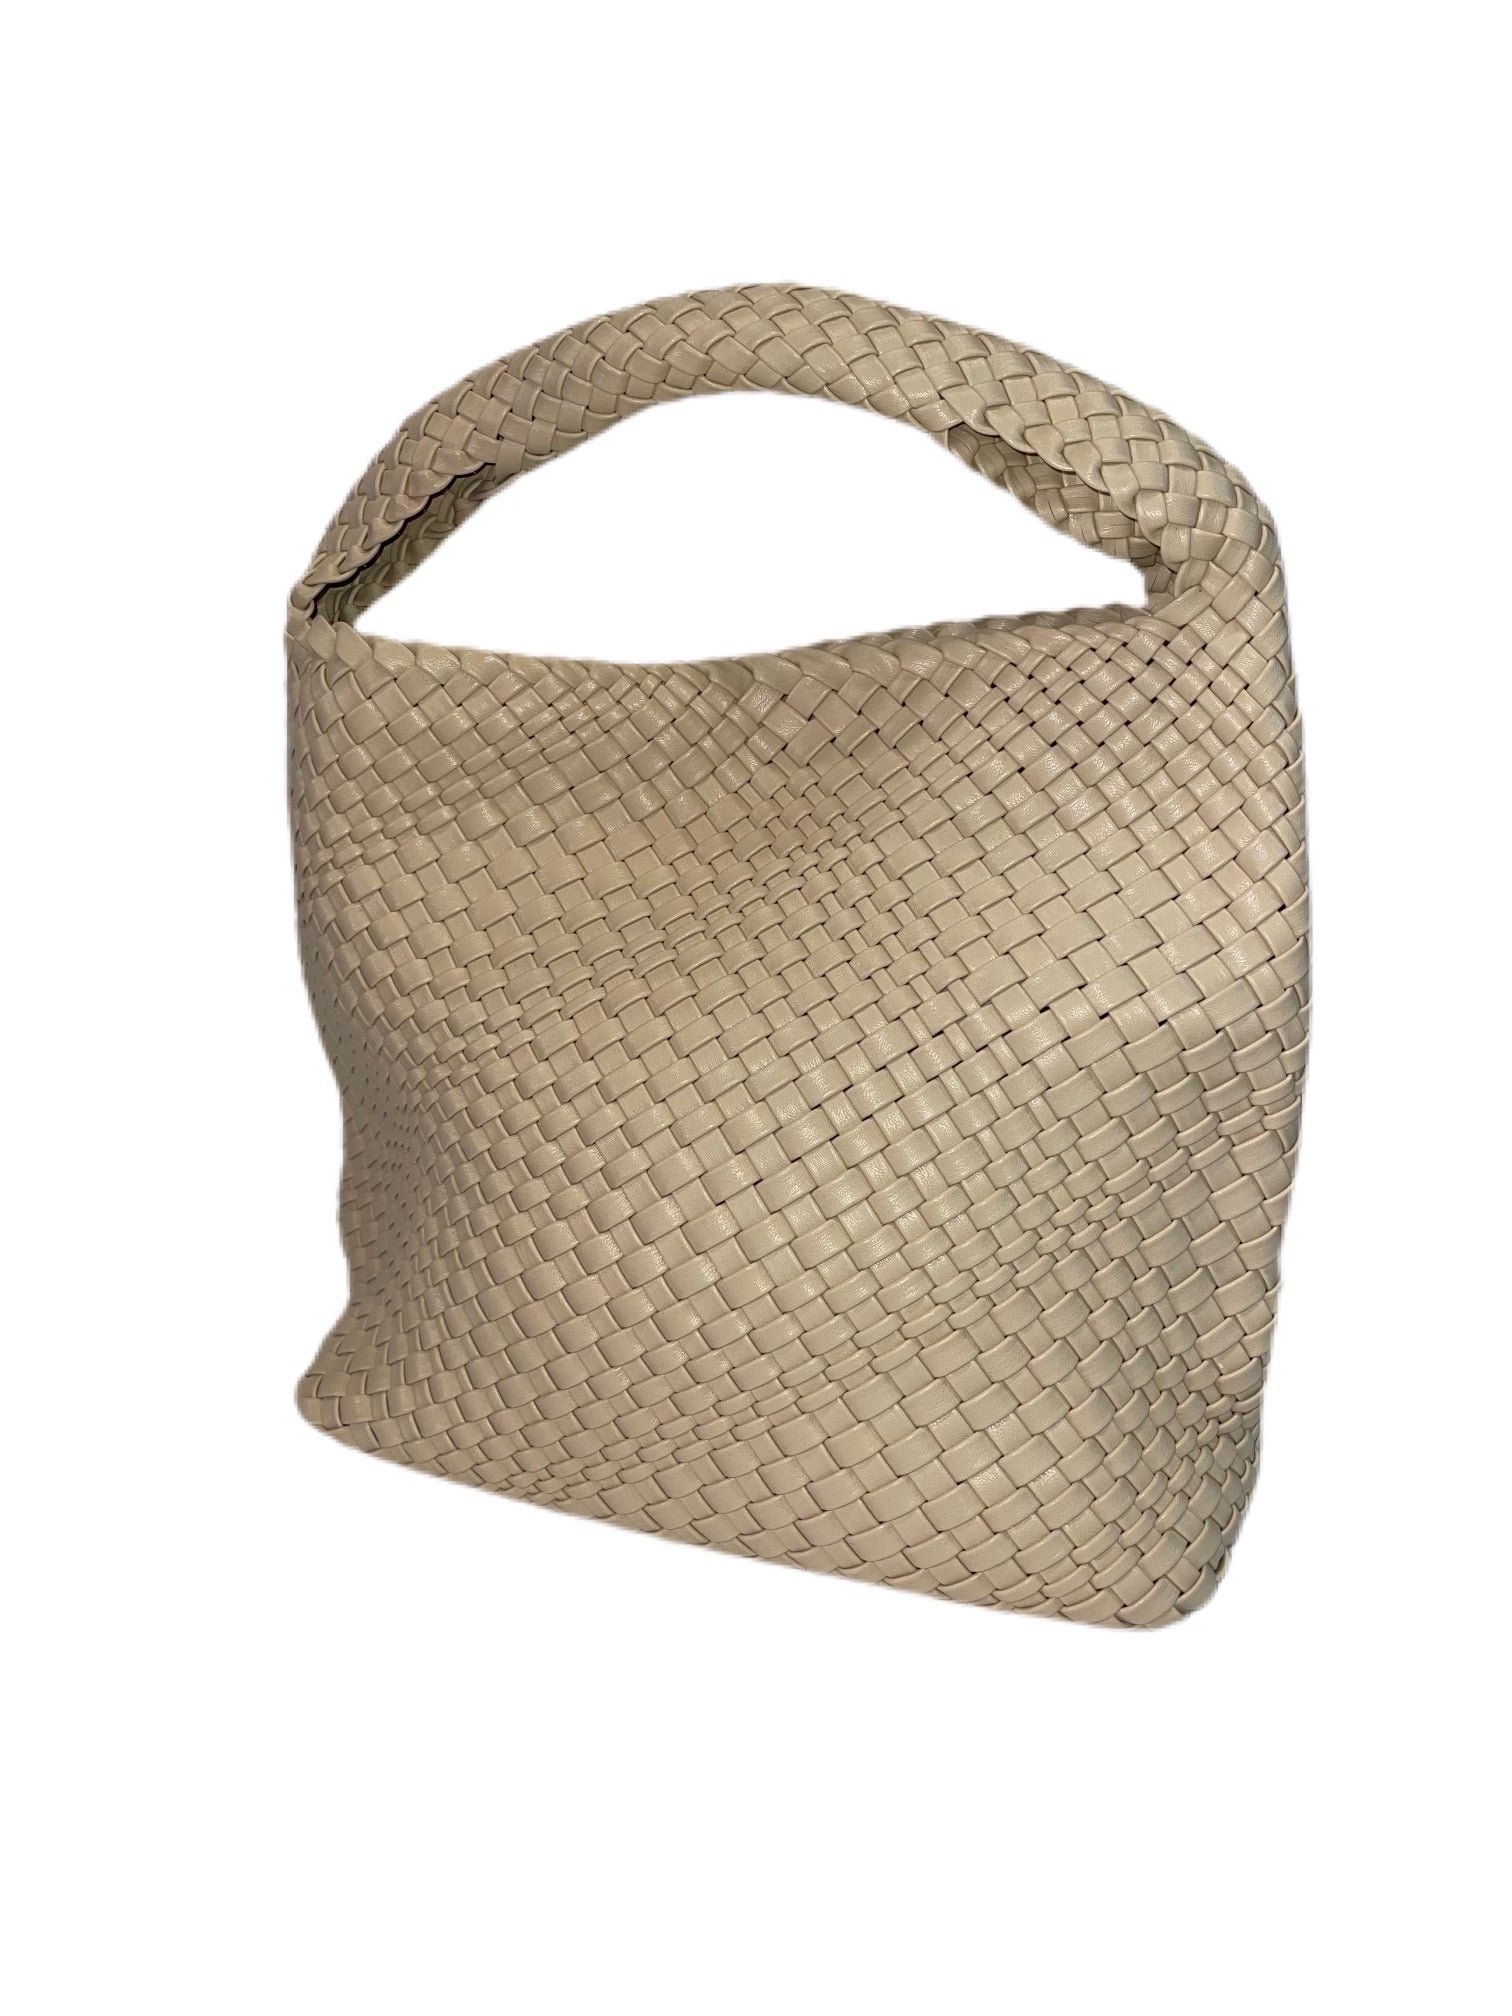 Woven Tote Bags - Multiple Color Totes/removable pouch